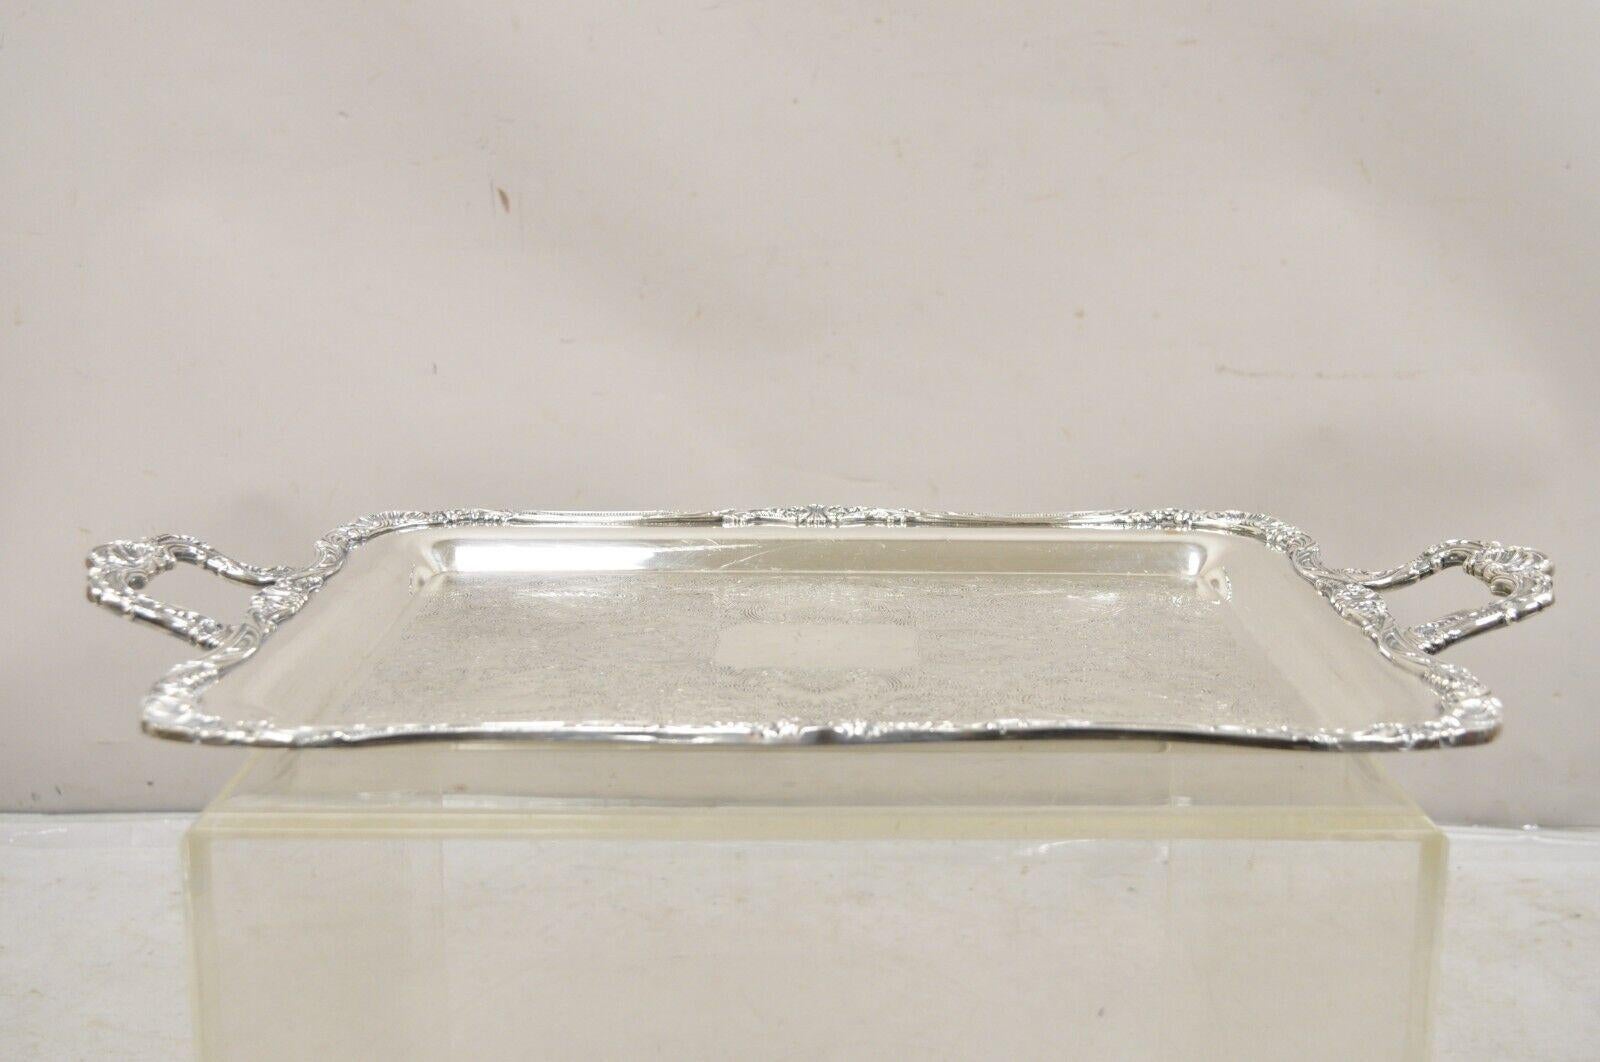 Vintage WM Rogers 290 Silver Plated Ornate Victorian Style Serving Platter Tray For Sale 3